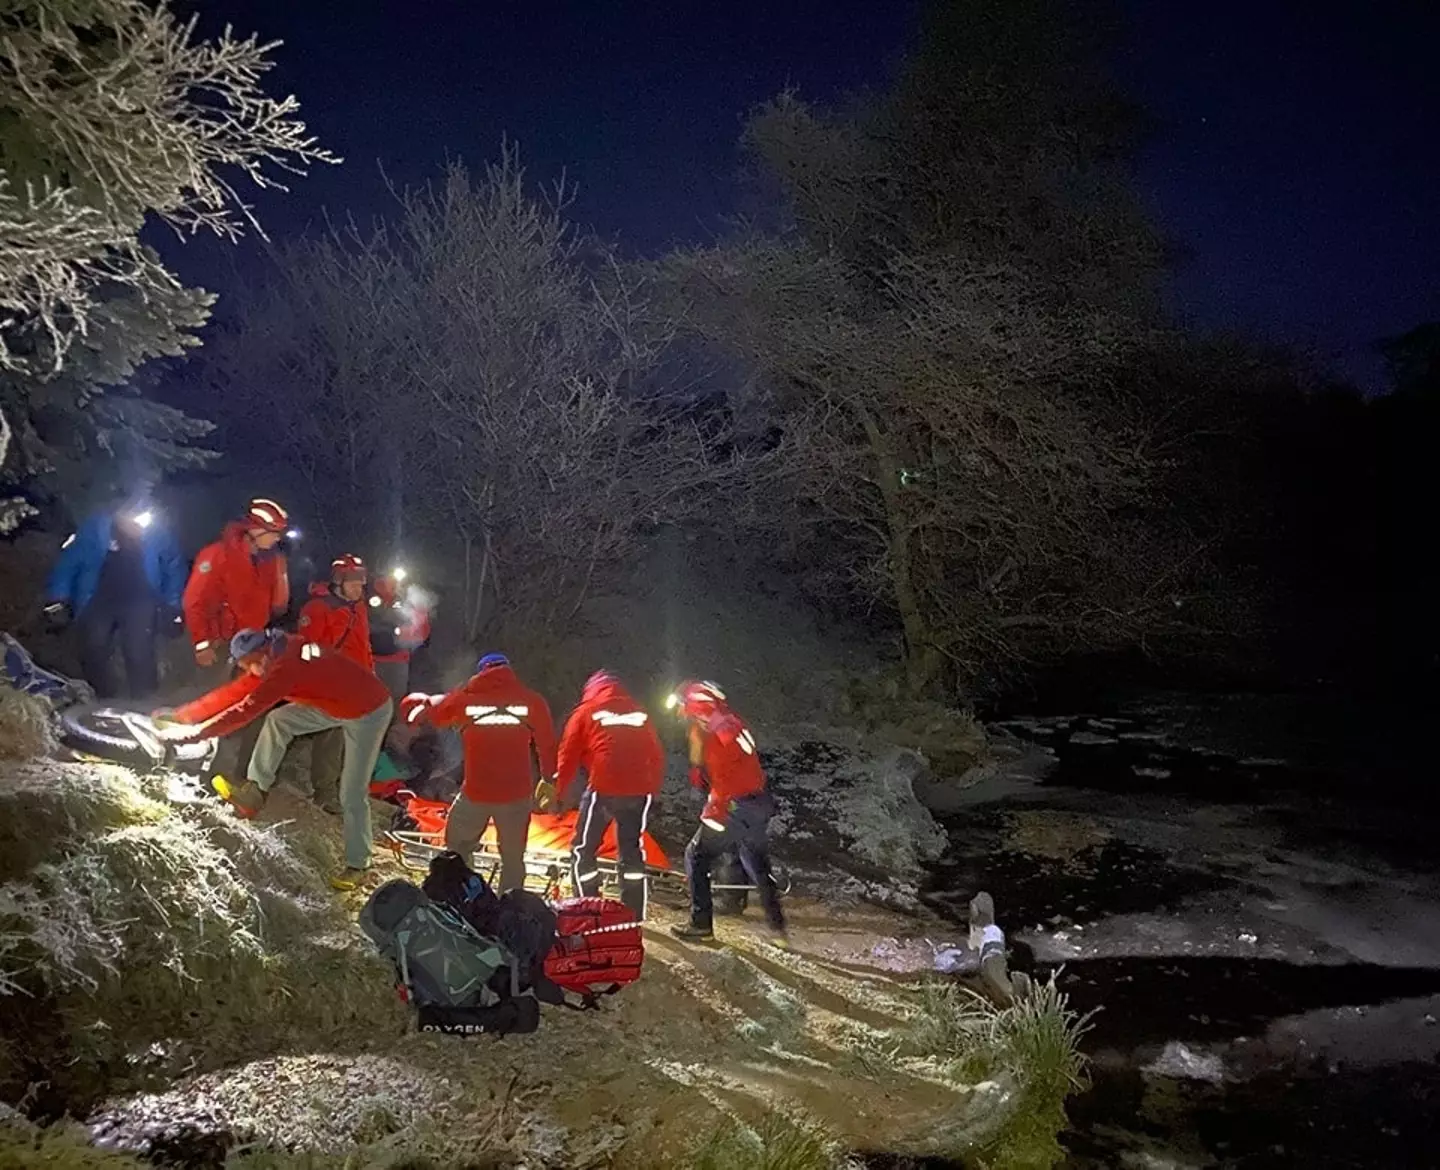 The incident occurred at Devil's Pulpit waterfall and stream near Loch Lomond on Wednesday, December 14.